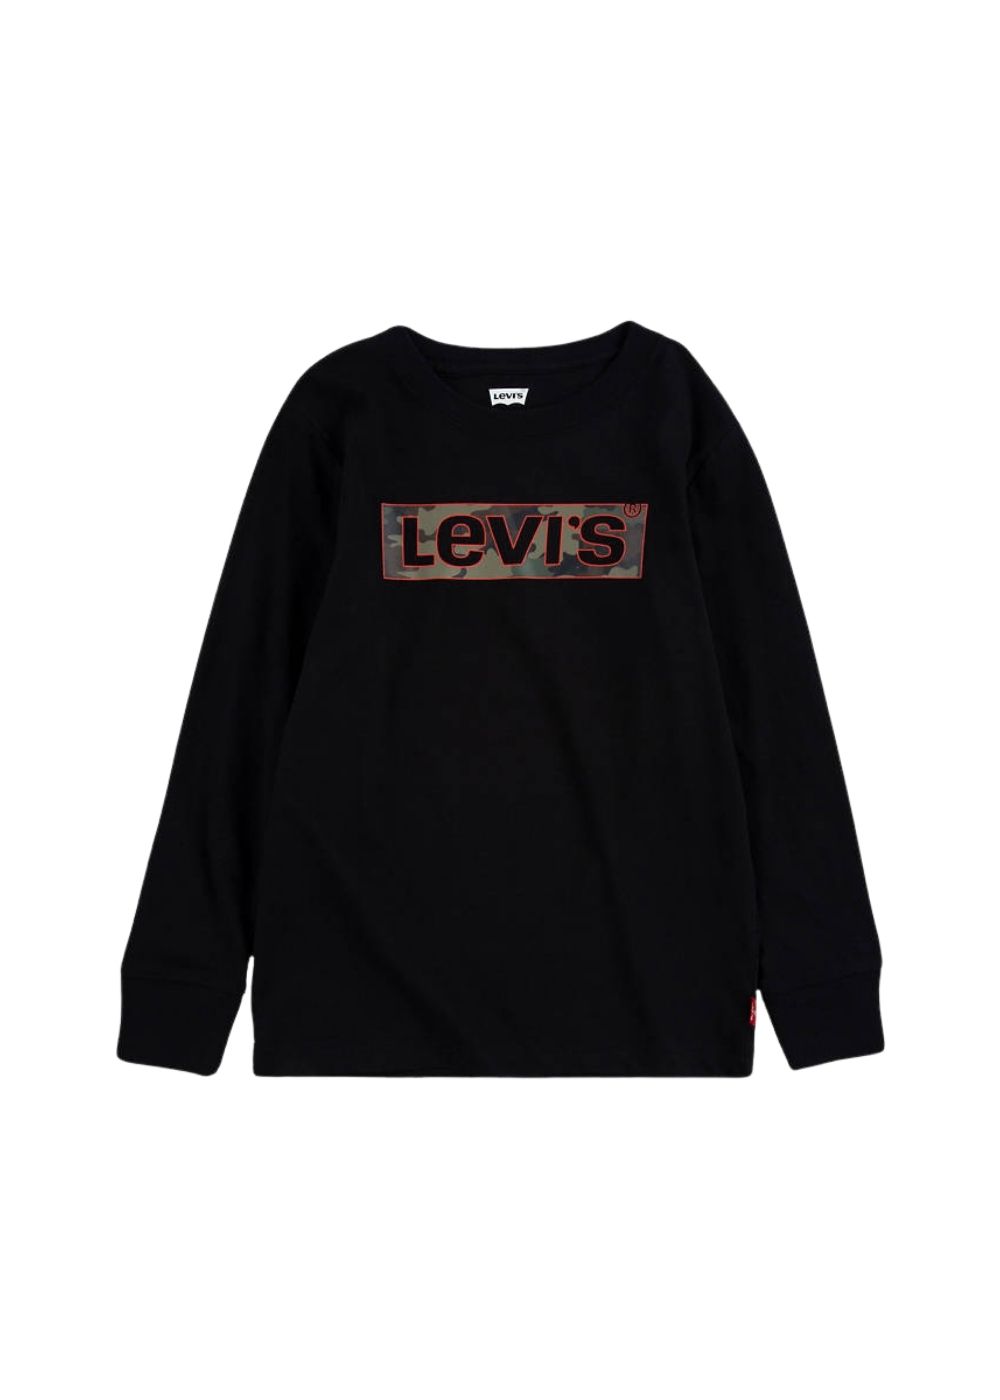 Featured image for “LEVI'S LOGO MILITARE”